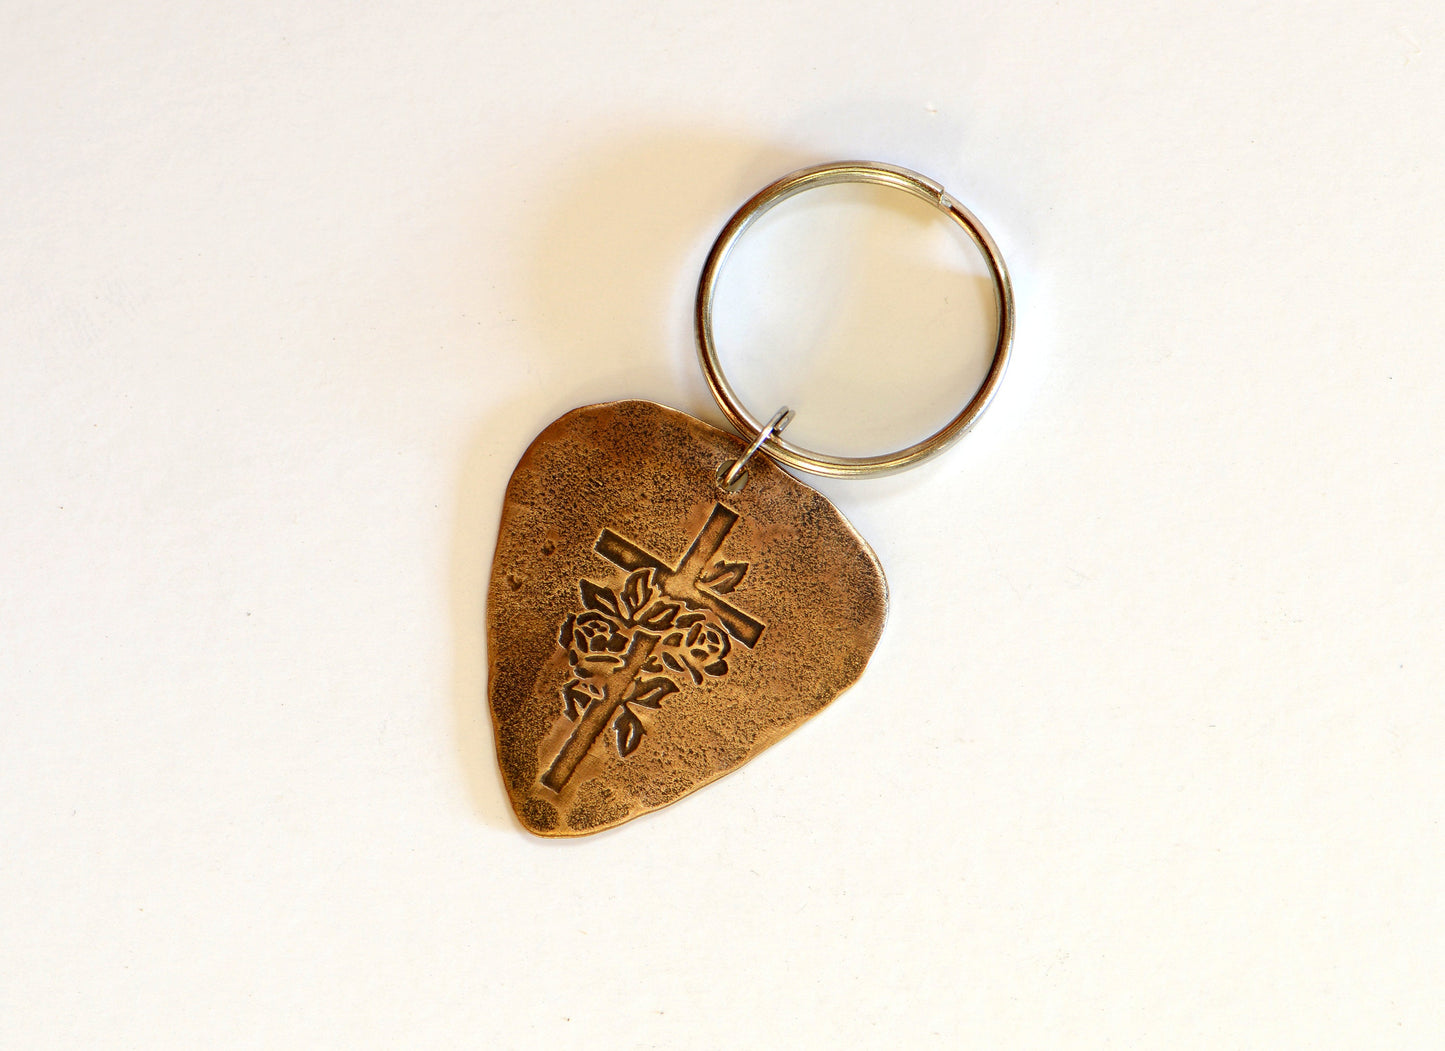 Roses and cross design on bronze guitar pick keychain